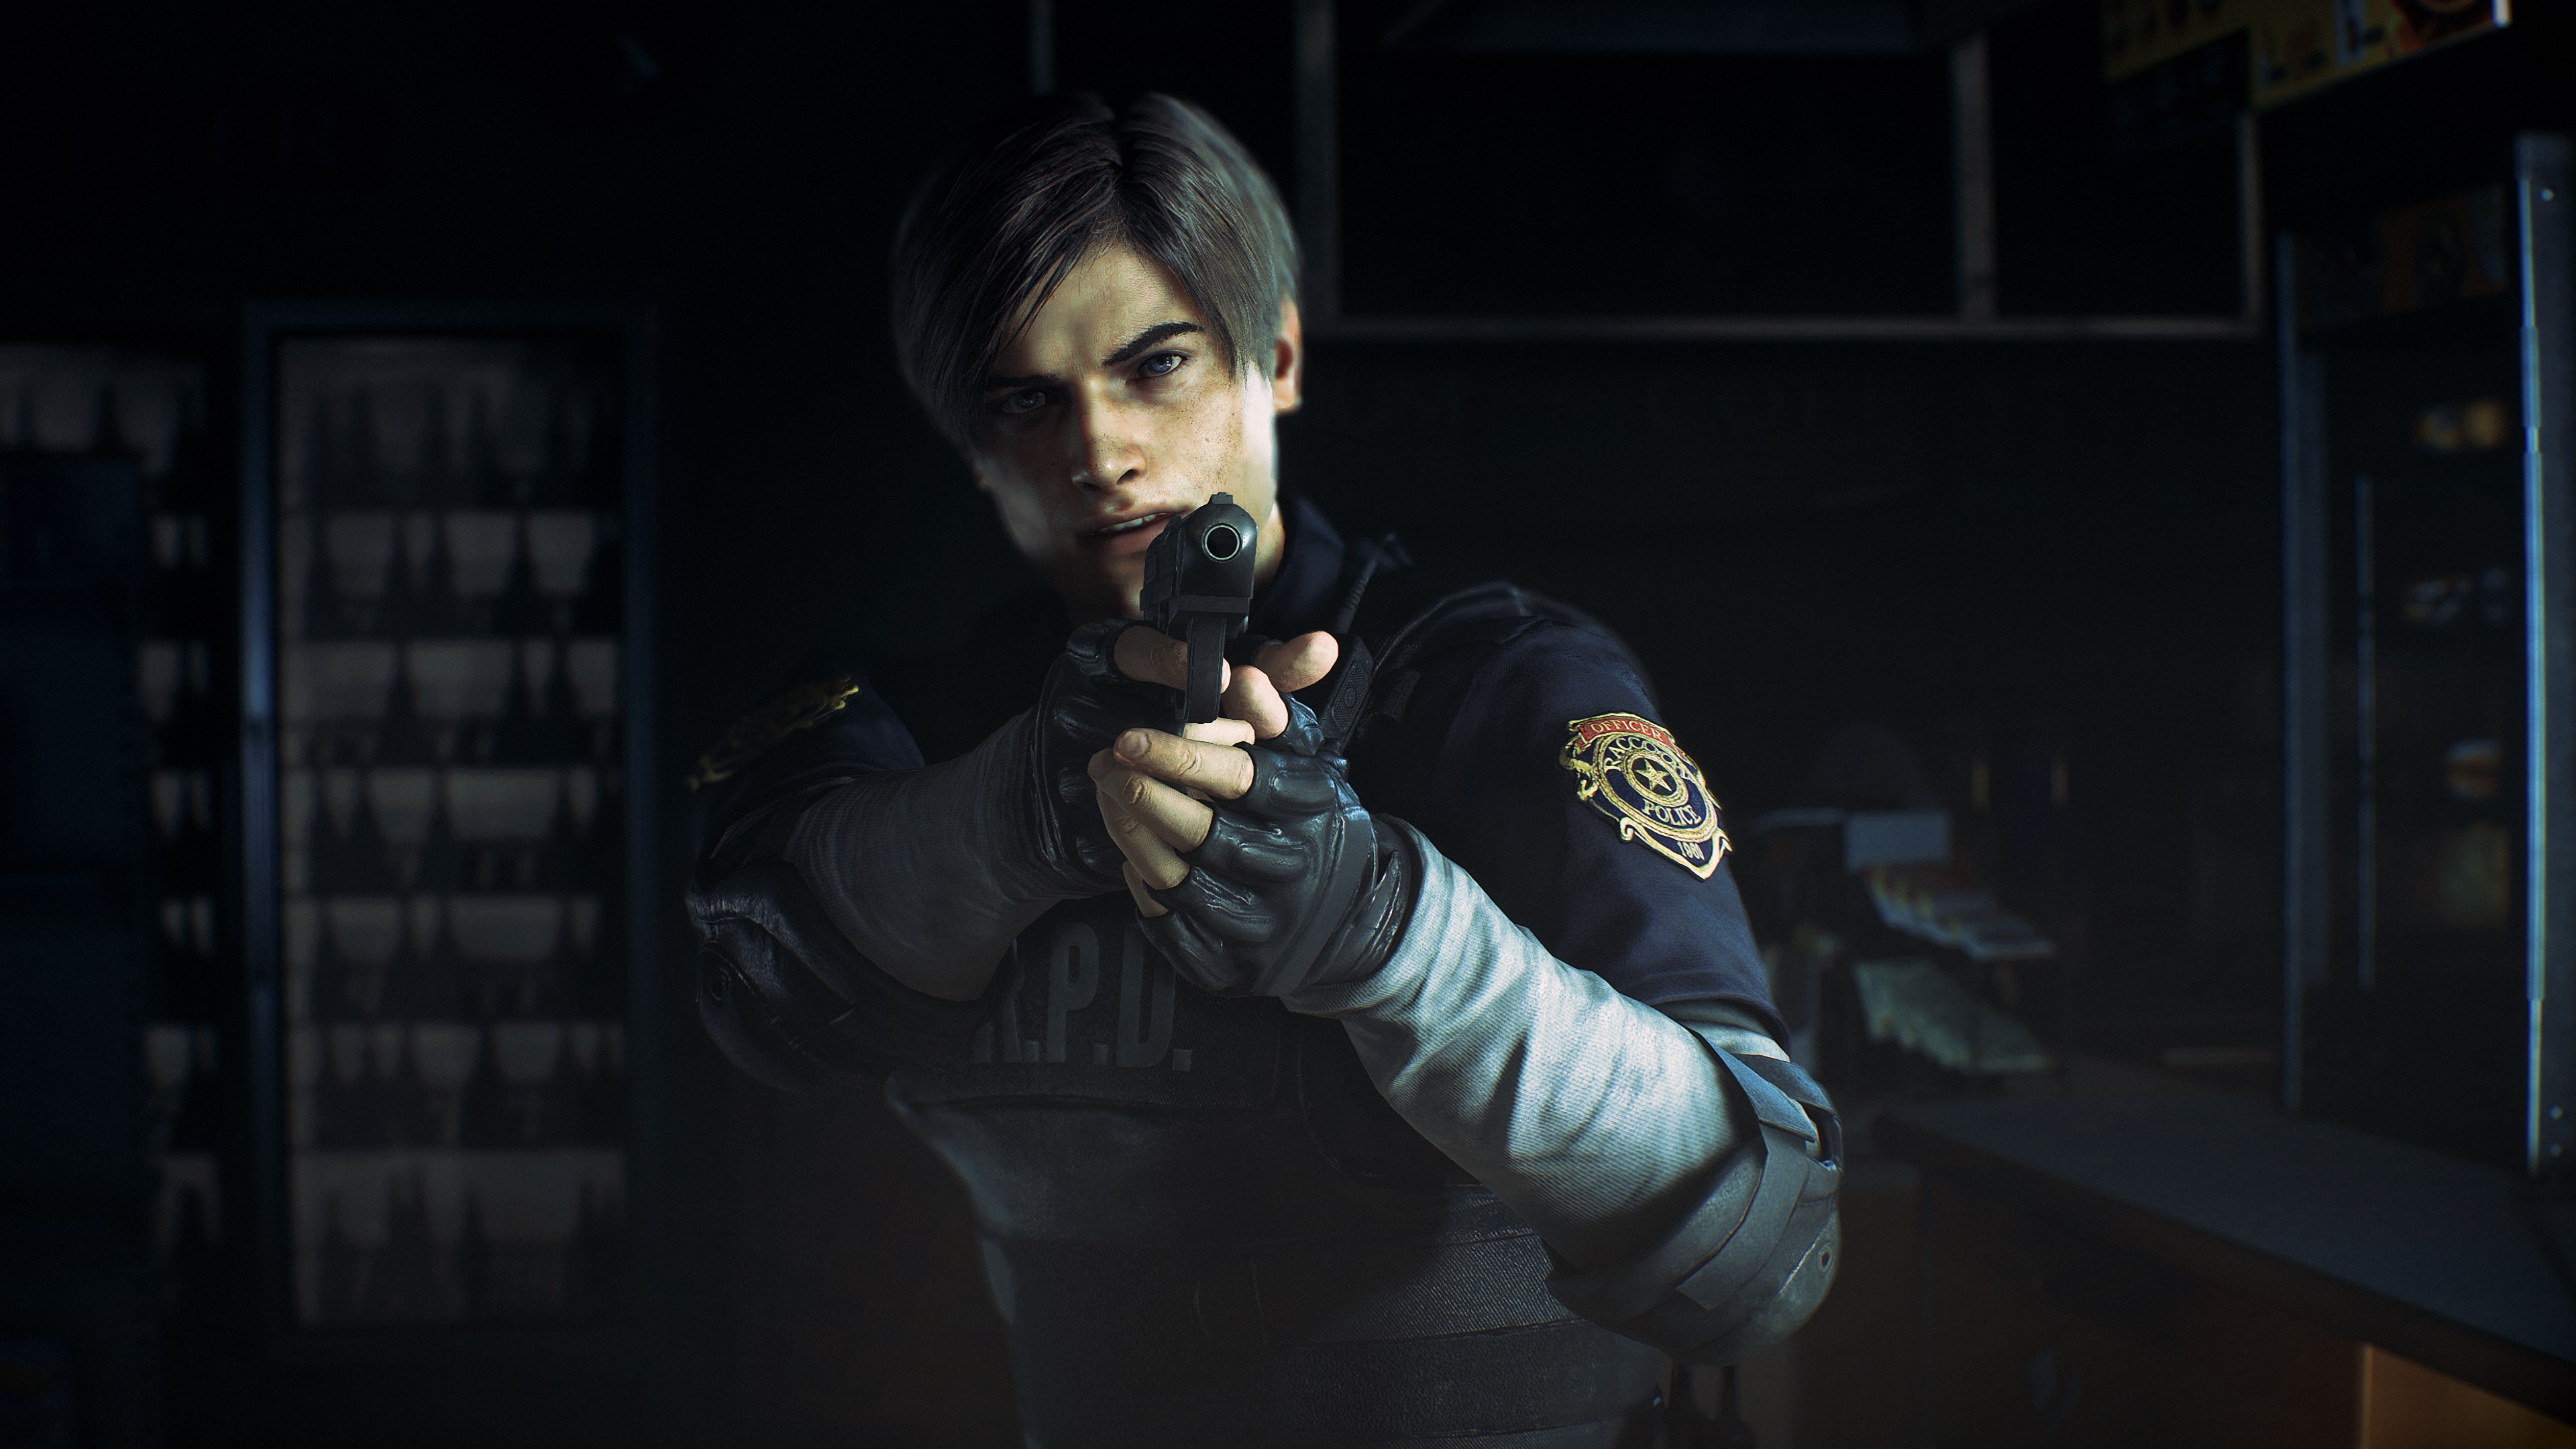 Steam Community: Resident Evil 2. it's funny to think Leon and